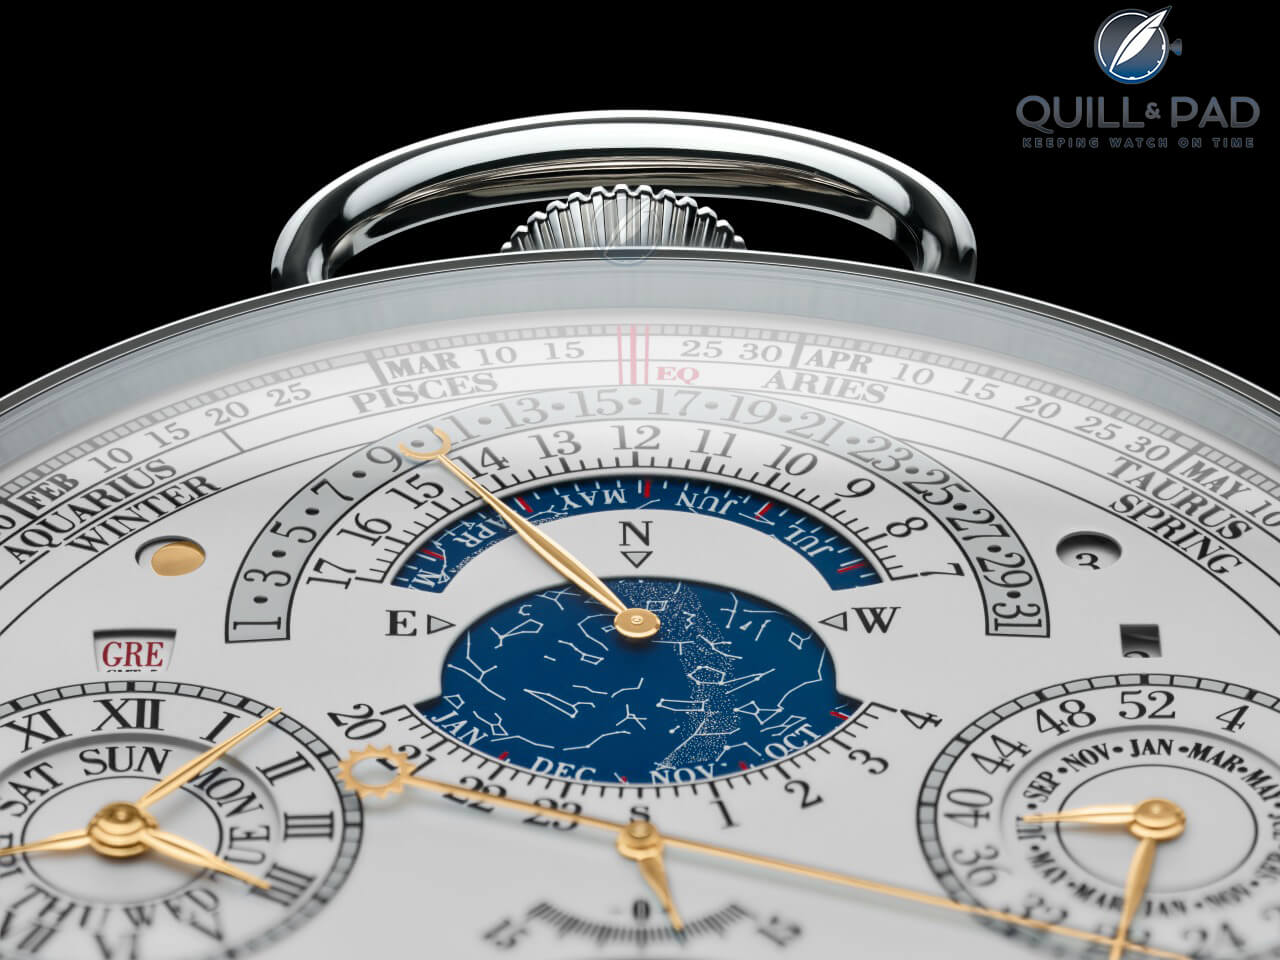 A close-up view of parts of the perpetual and astronomical calendars of Vacheron Constantin’s Reference 57260